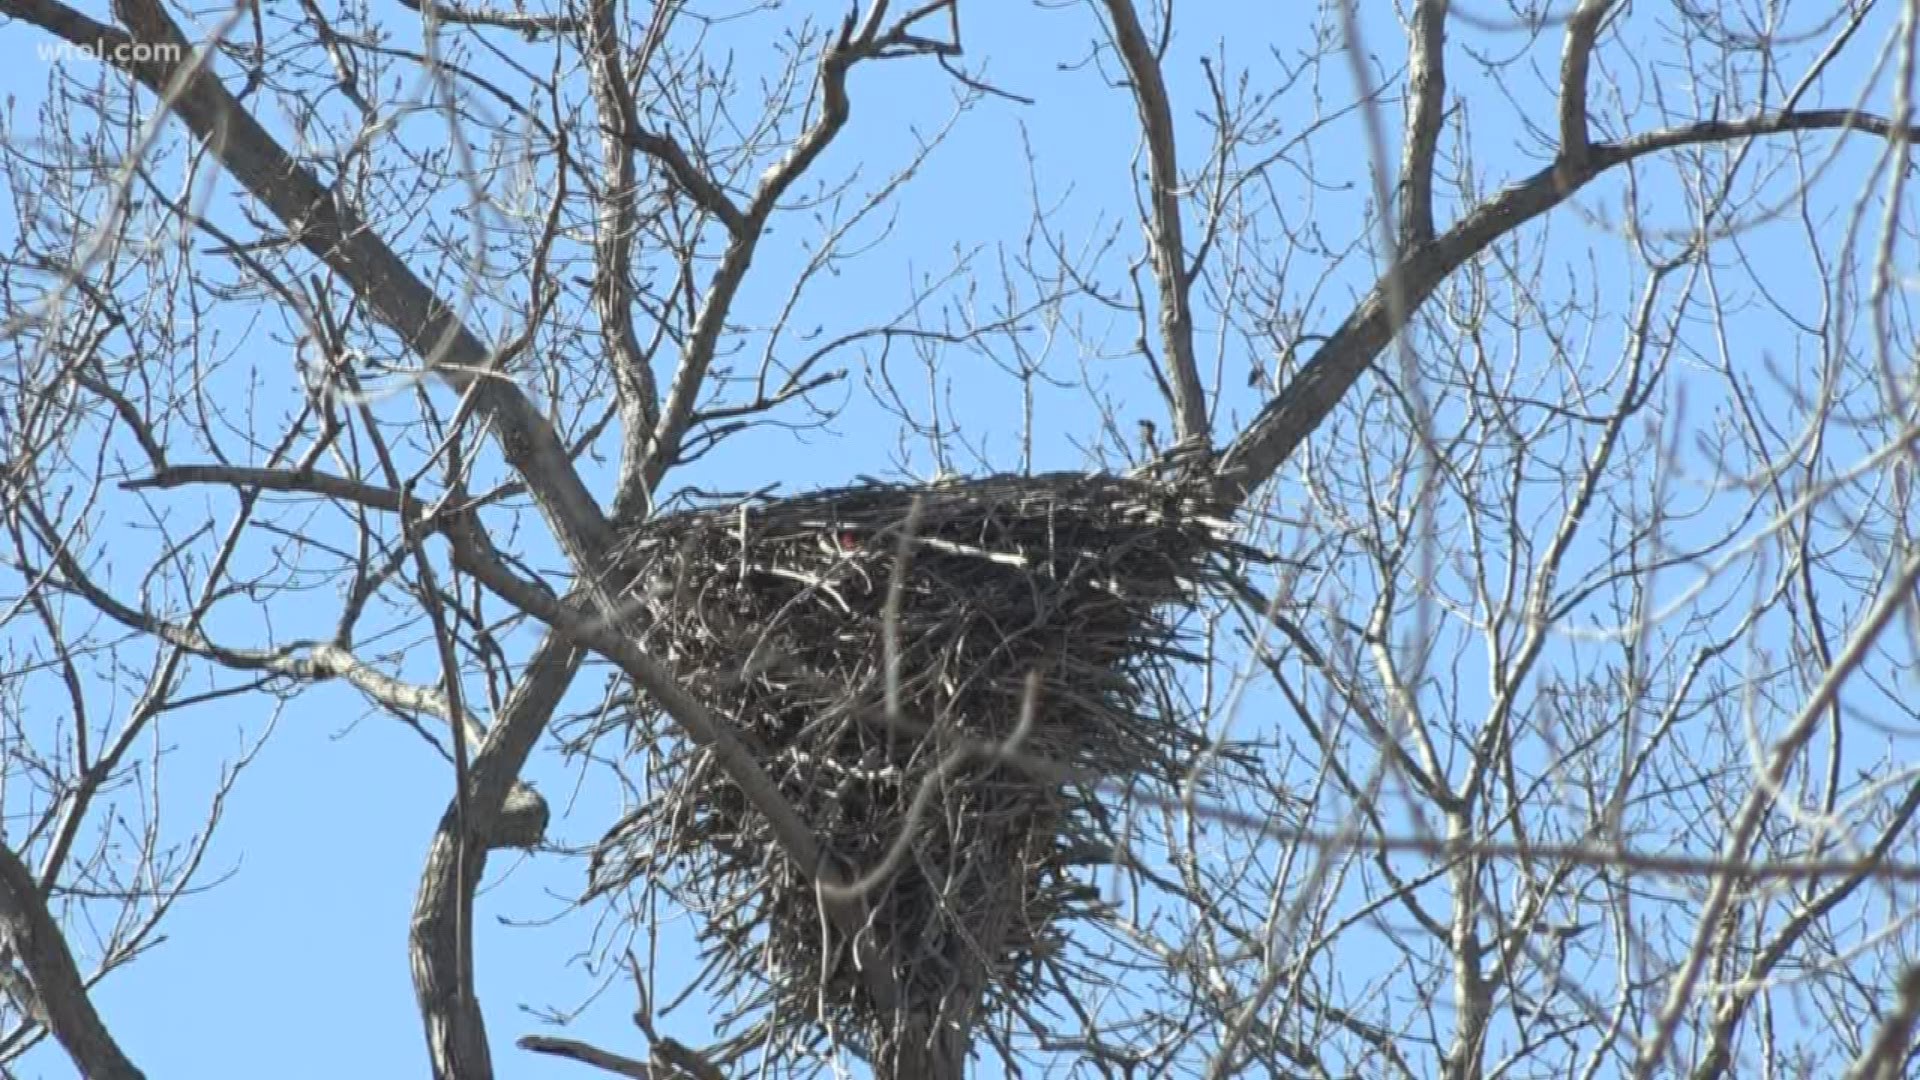 ODNR is asking for help from the public to track every bald eagle in the state